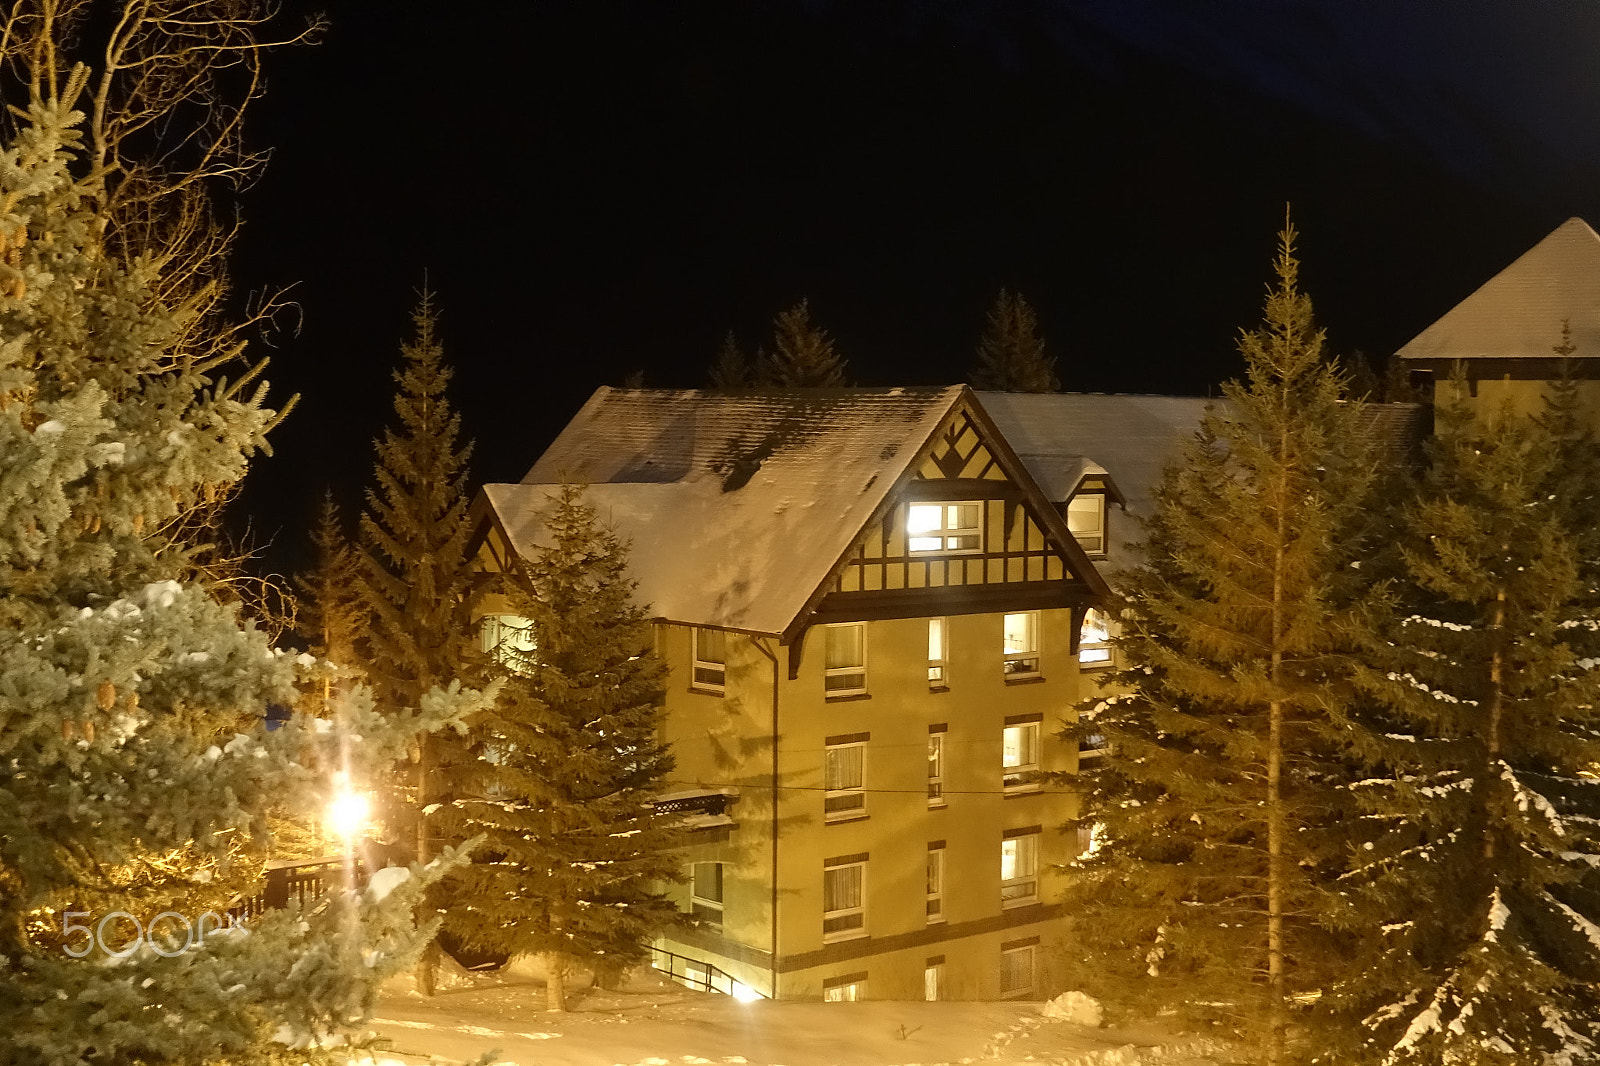 Minolta AF 28-85mm F3.5-4.5 New sample photo. Banff springs in the canaidian rockies photography